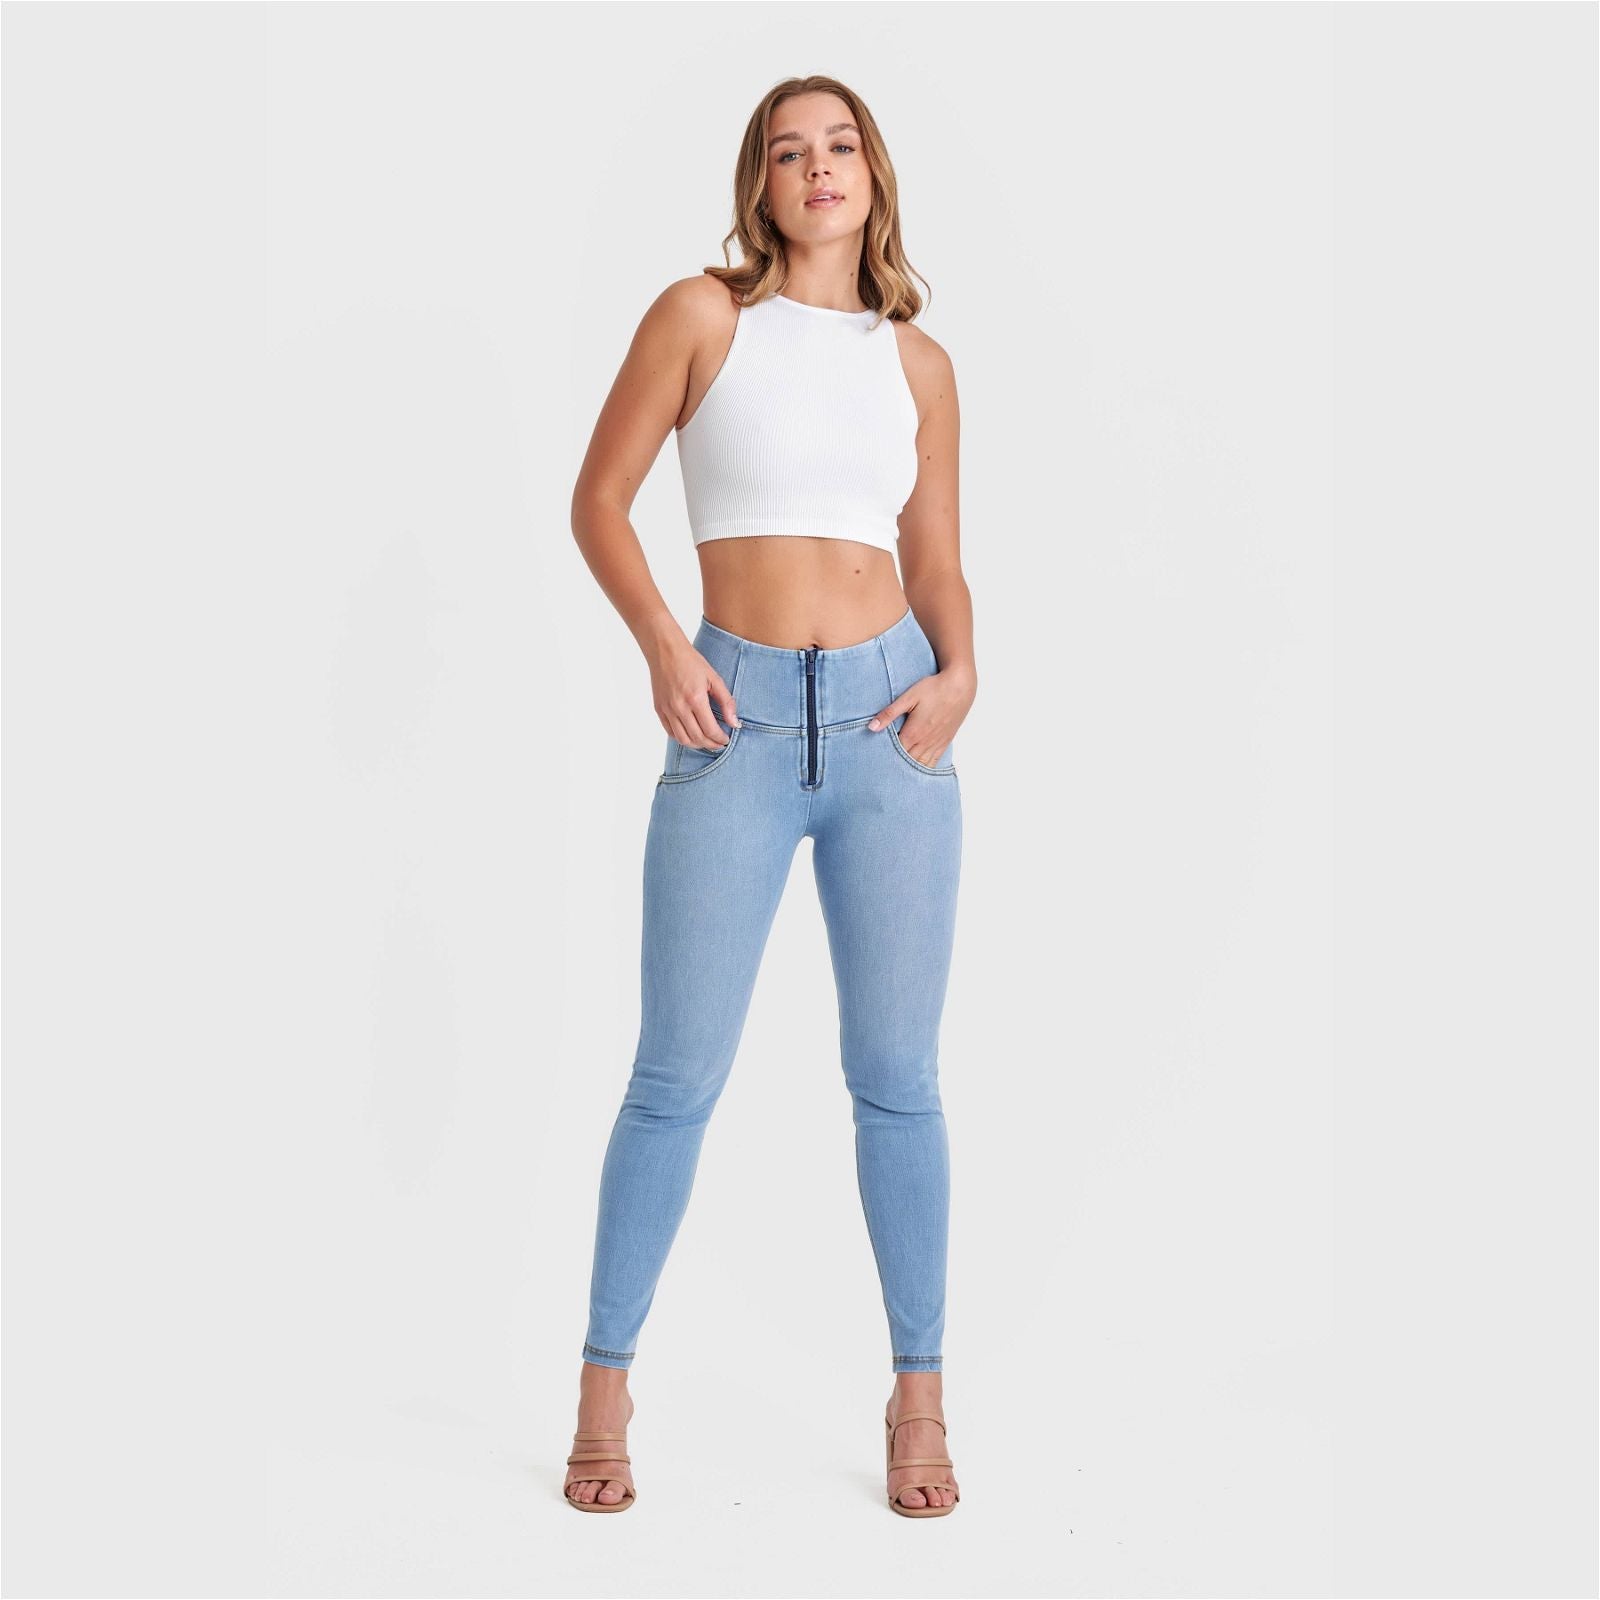 WR.UP® SNUG Jeans - High Waisted - Full Length - Light Blue + Yellow Stitching 2